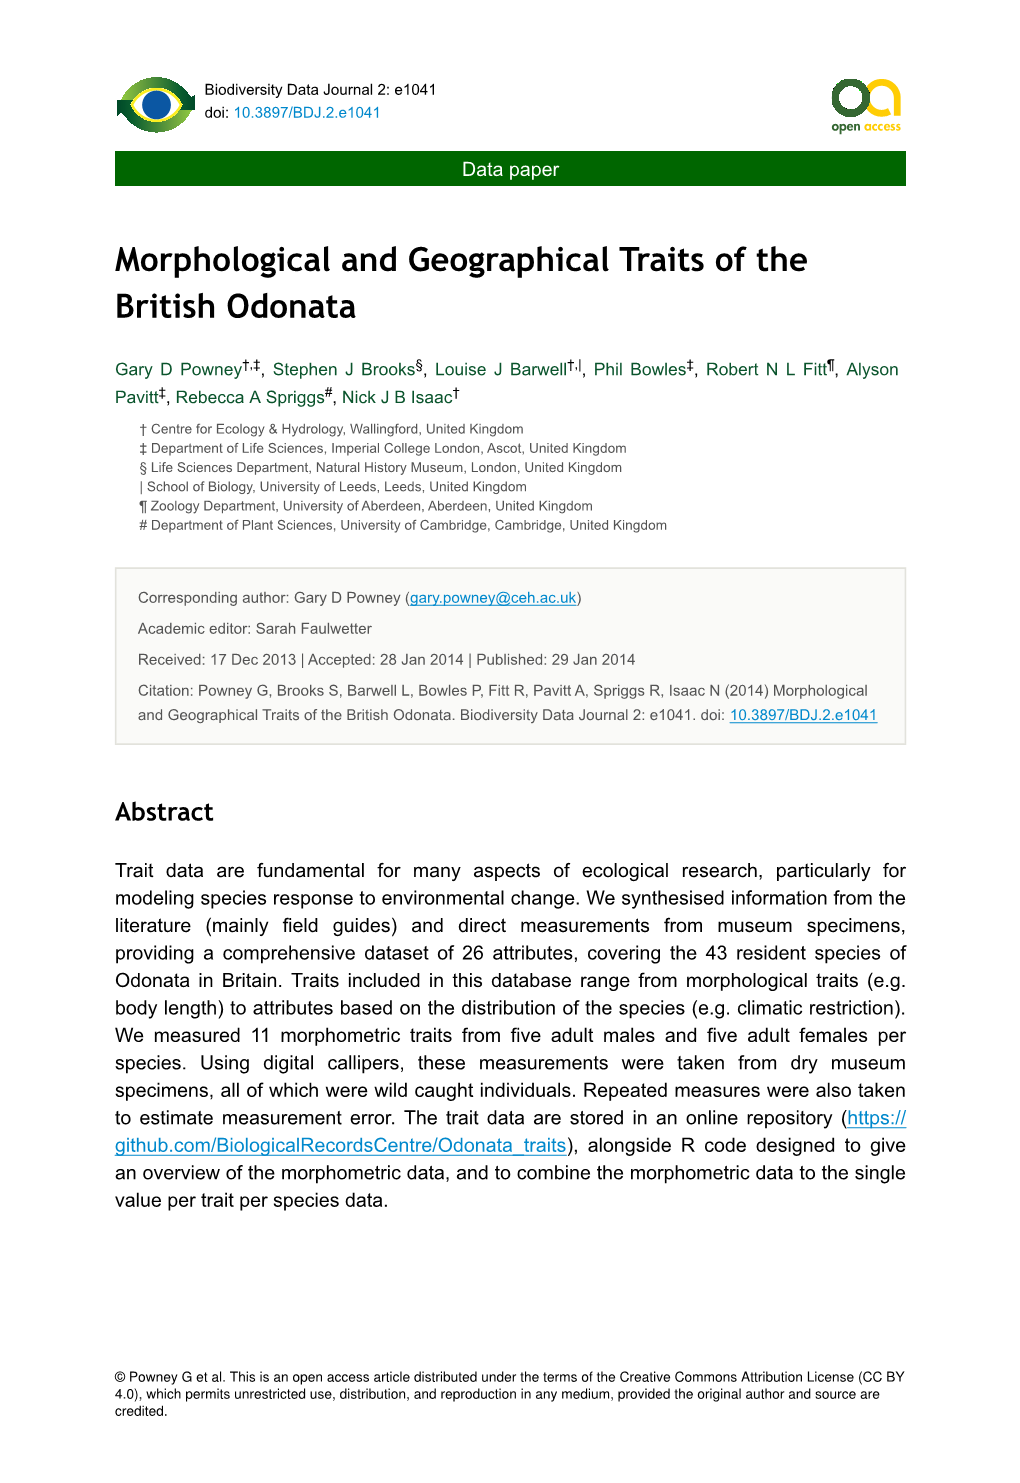 Morphological and Geographical Traits of the British Odonata